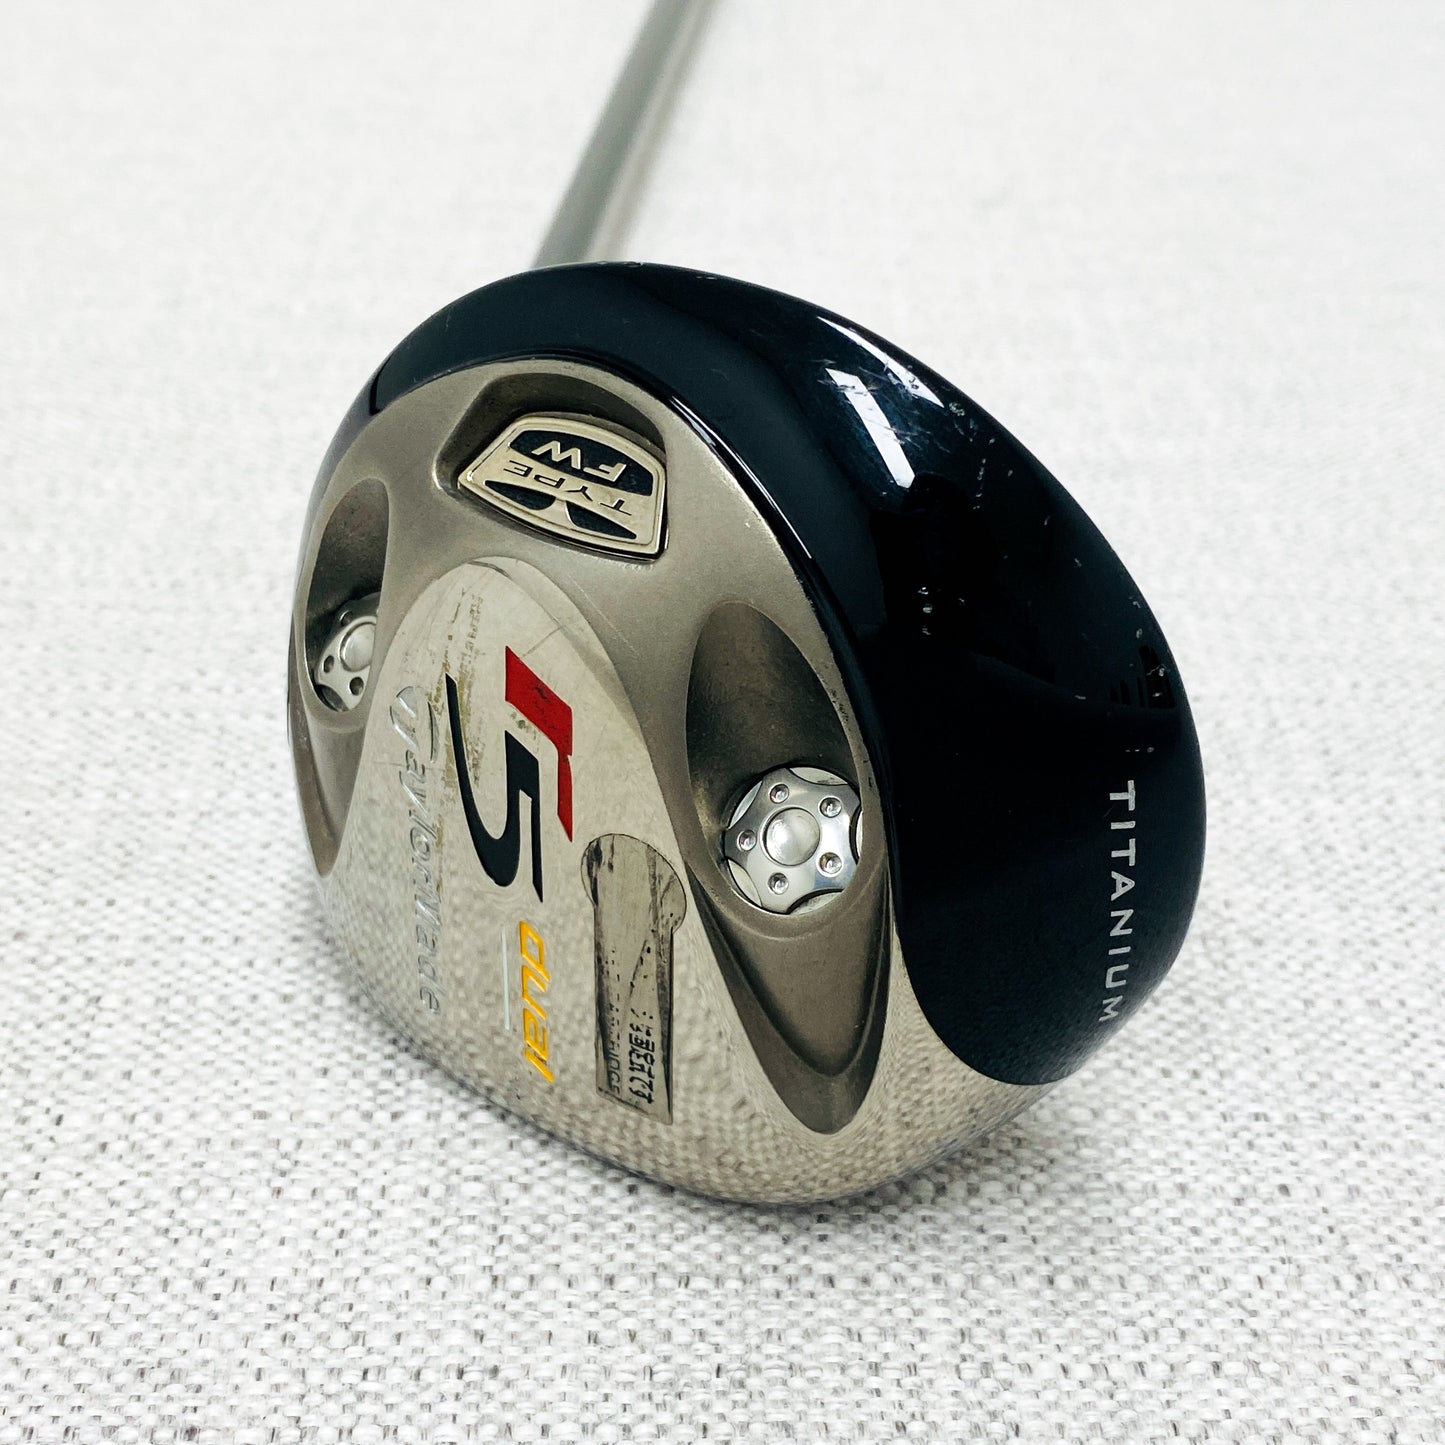 TaylorMade R5 Dual 5-Wood. 18 Degree, Regular Flex - Very Good Condition # T984